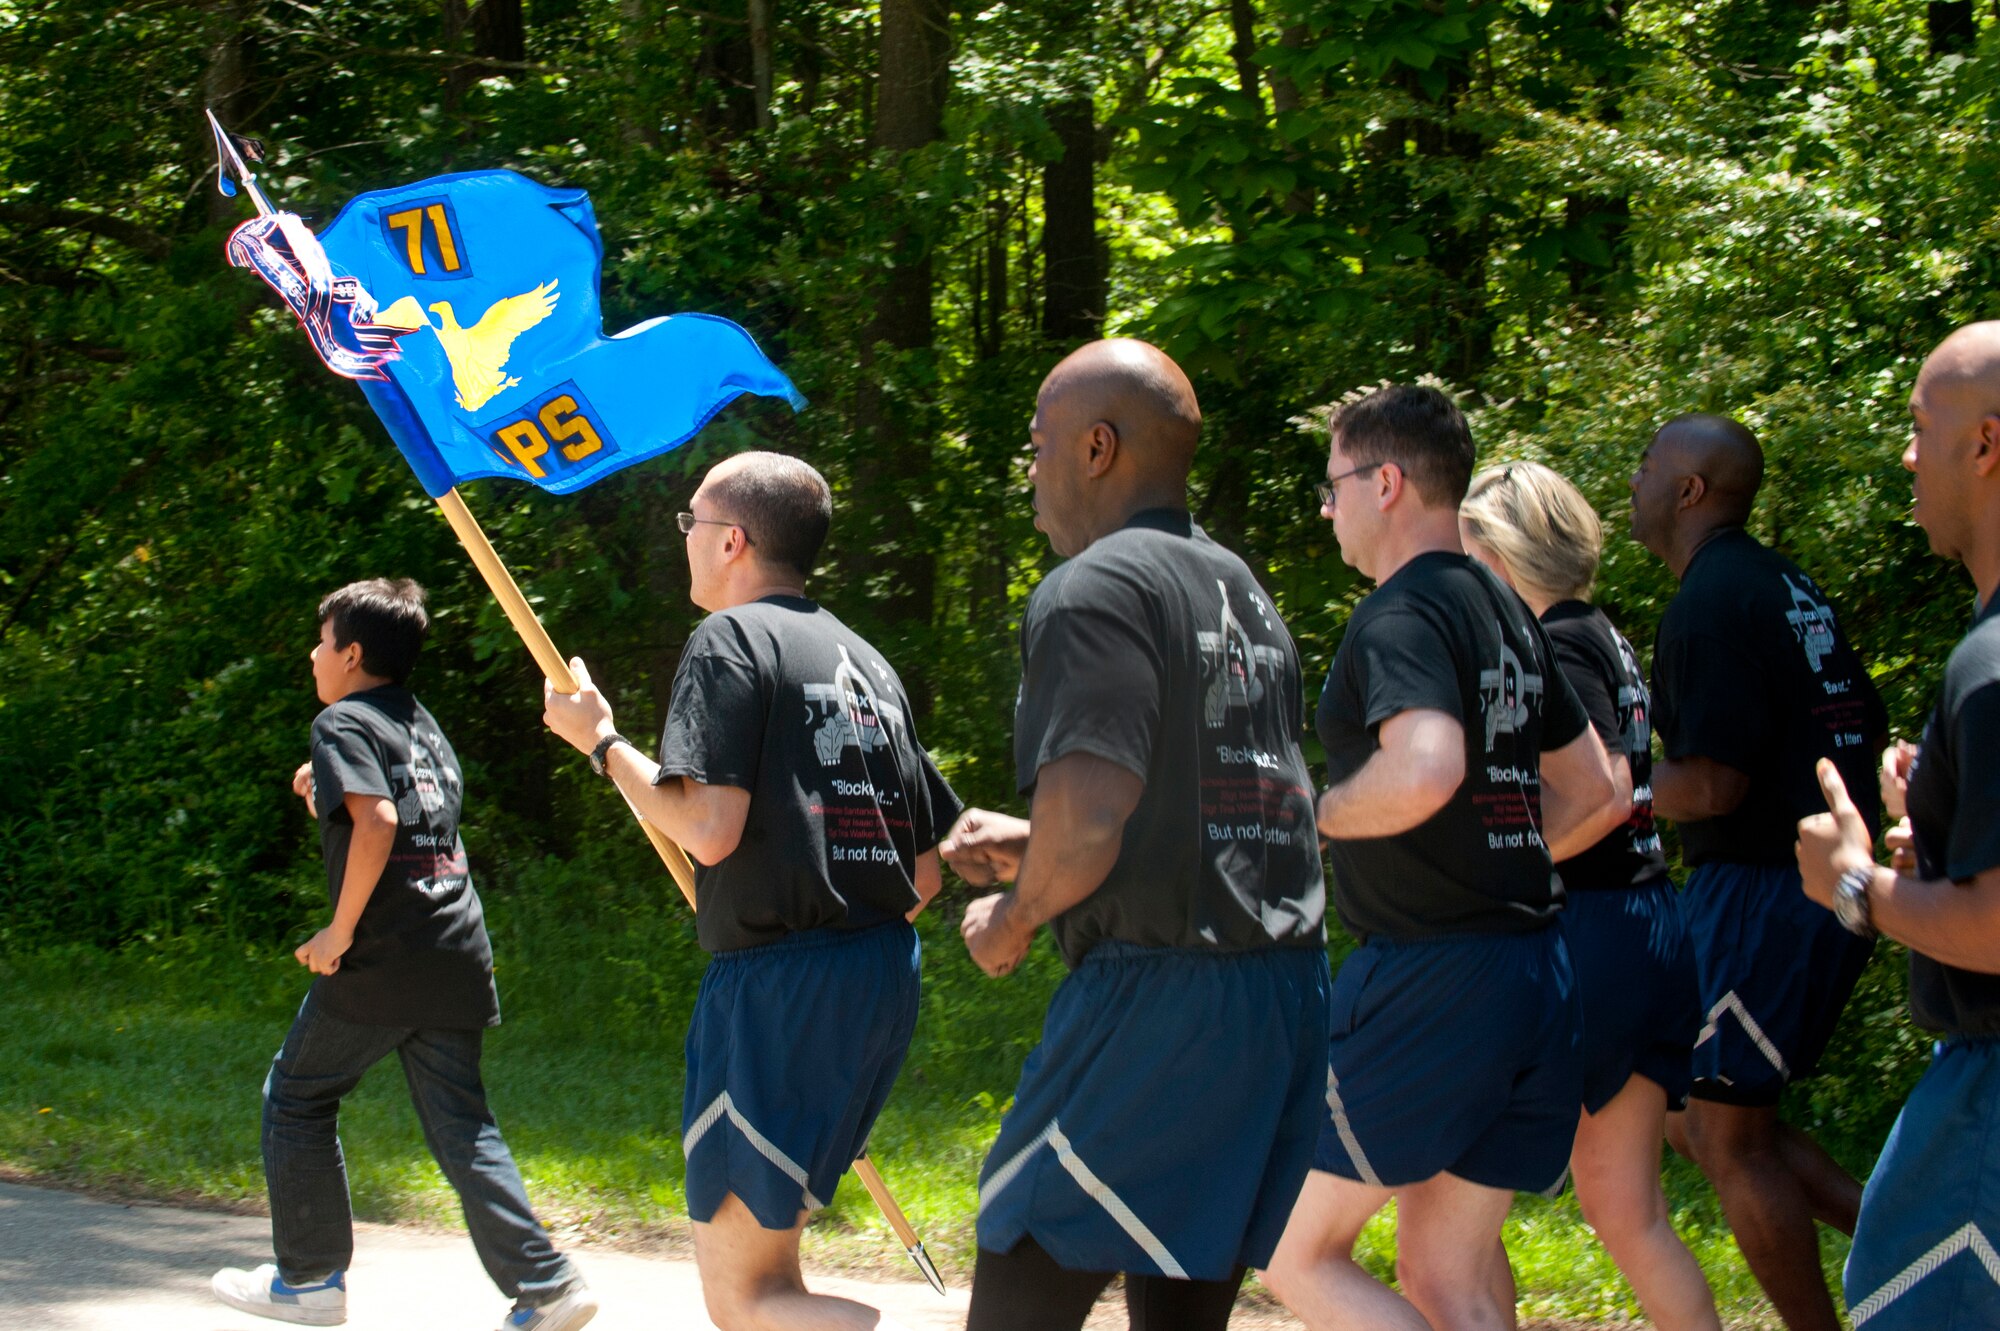 U.S. Air Force Reserves Airmen assigned to the 71st Aerial Port Squadron run in formation during a memorial ceremony at Langley Air Force Base, Va., May 14, 2016. This year, the squadron honored five air transportation Airmen, including Tech. Sgt. Isaac Gervasio who served in the 71st APS before his death in November 2015. (U.S. Air Force photo by Staff Sgt. R. Alex Durbin)